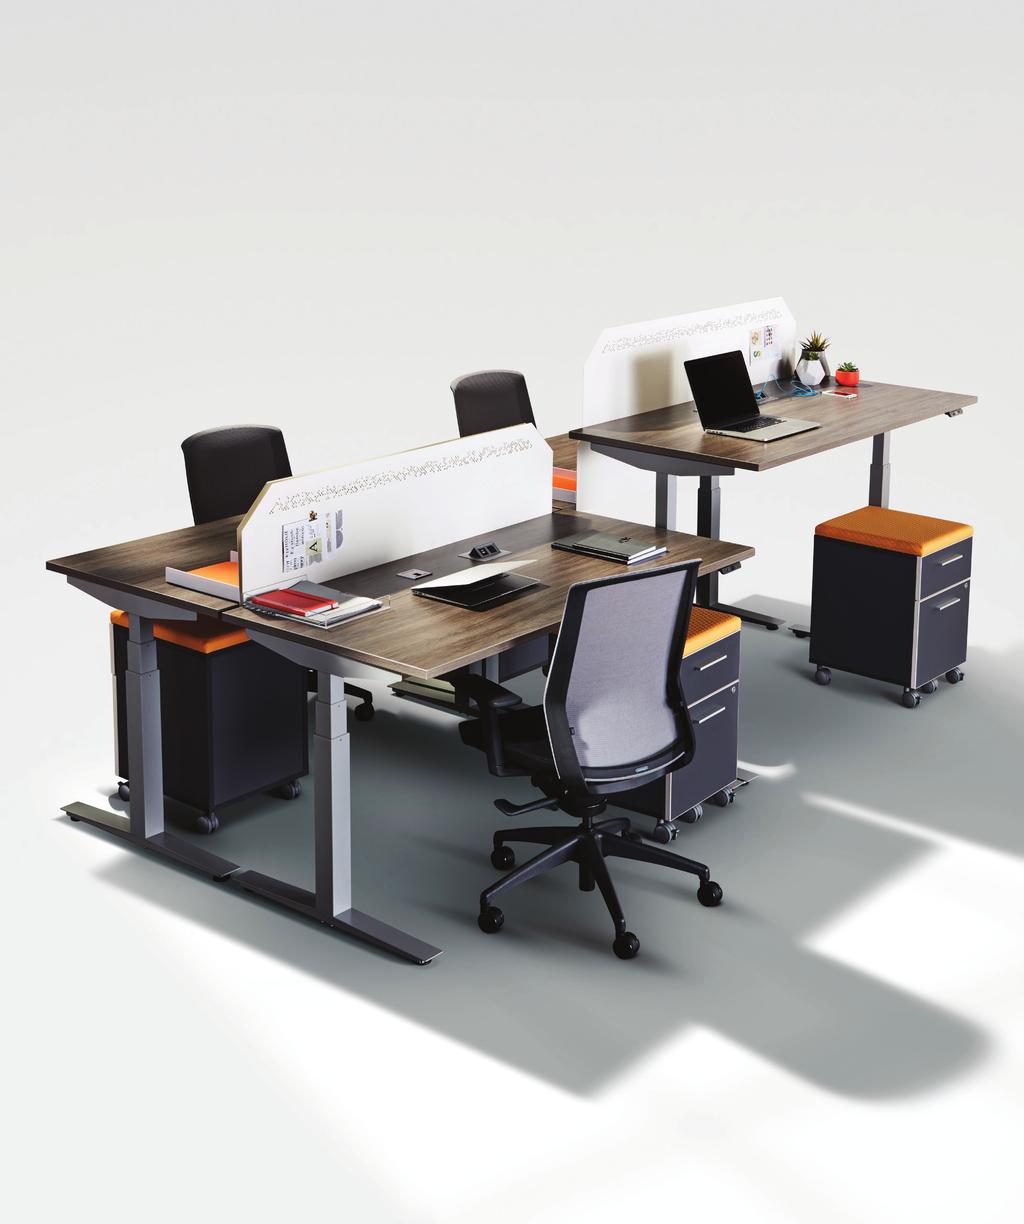 HEIGHT ADJUSTABLE TABLE Height adjustable tables provide the flexibility and function necessary for healthy living in